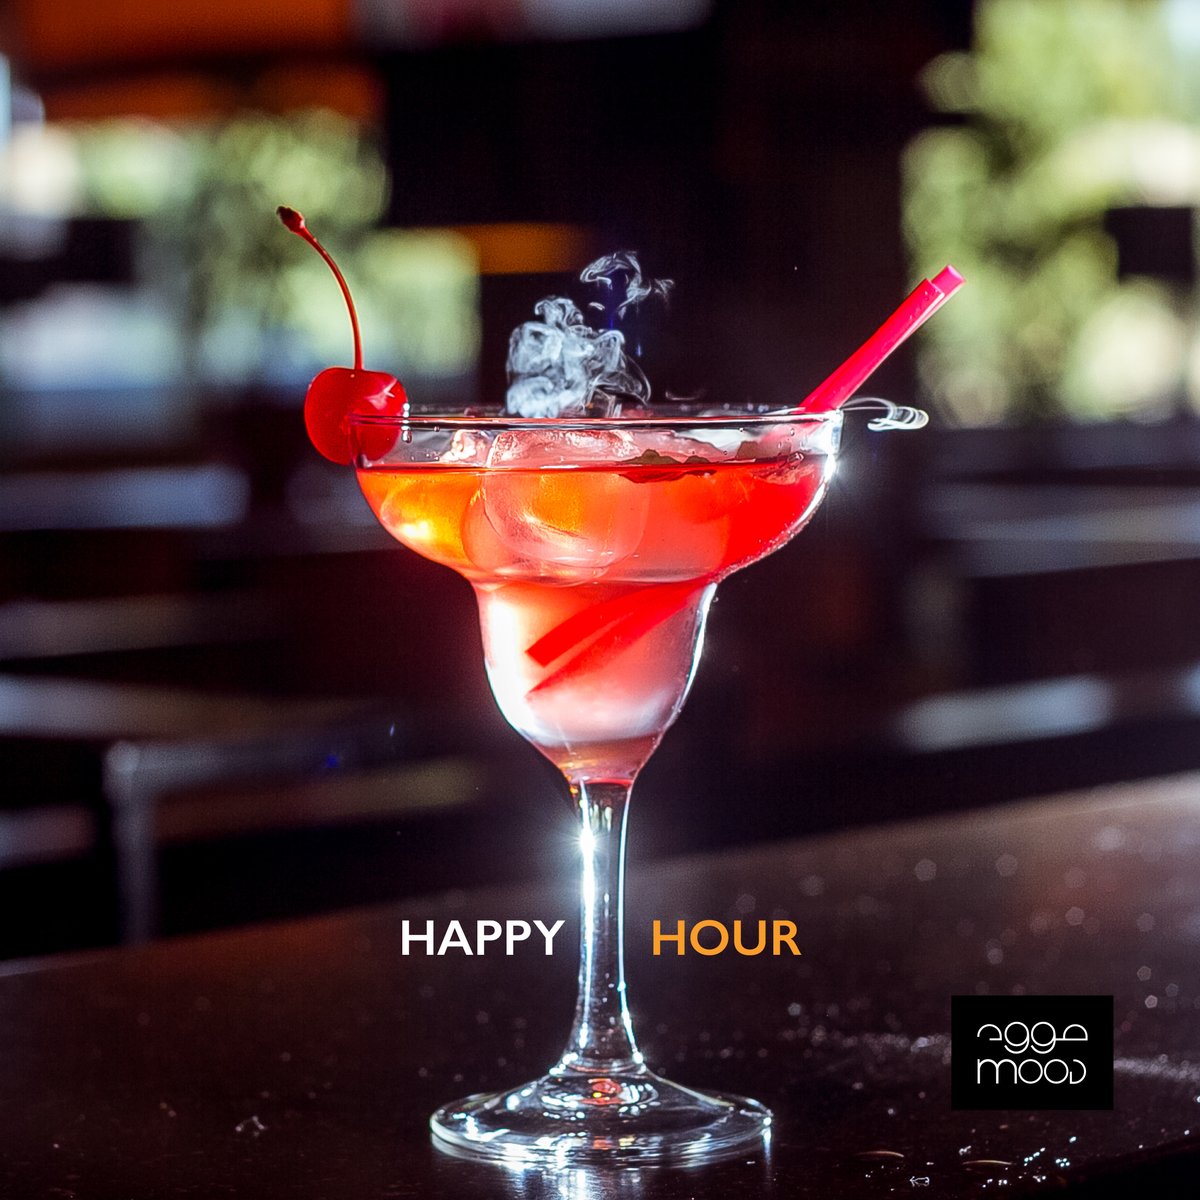 Sip, savor, and celebrate! Join us every day from 6:00 PM to 8:00 PM for the happiest hours of your day. Our daily Happy Hour is the perfect recipe for laughter, good company, and delicious bites.

#corpamman #hmhhotelgroup #amman #food #foodi #restaurant #happyhour #discount